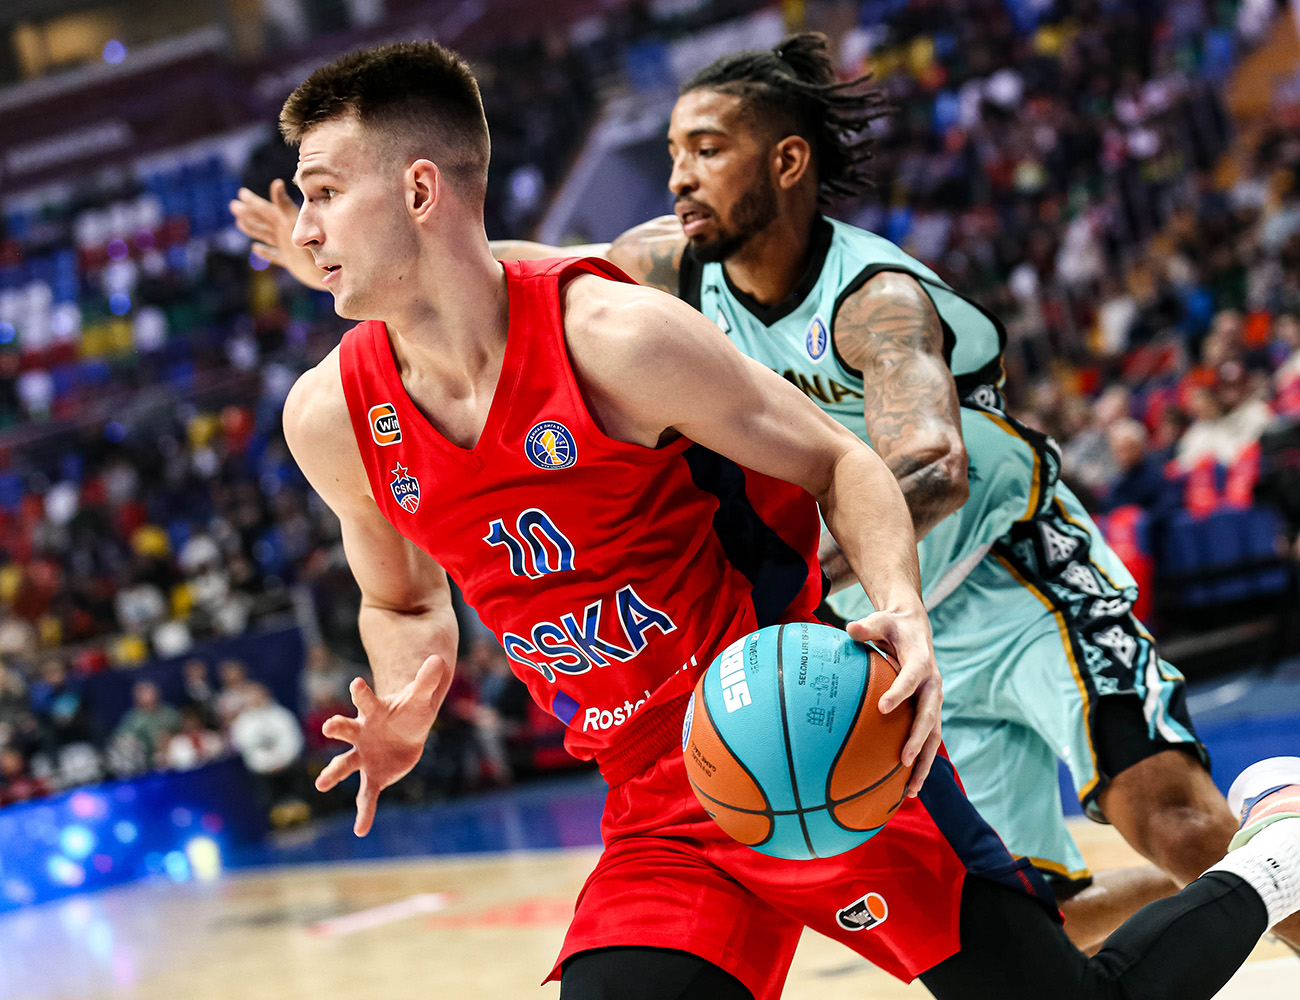 CSKA has the seventh win in a row, this time defeating Astana